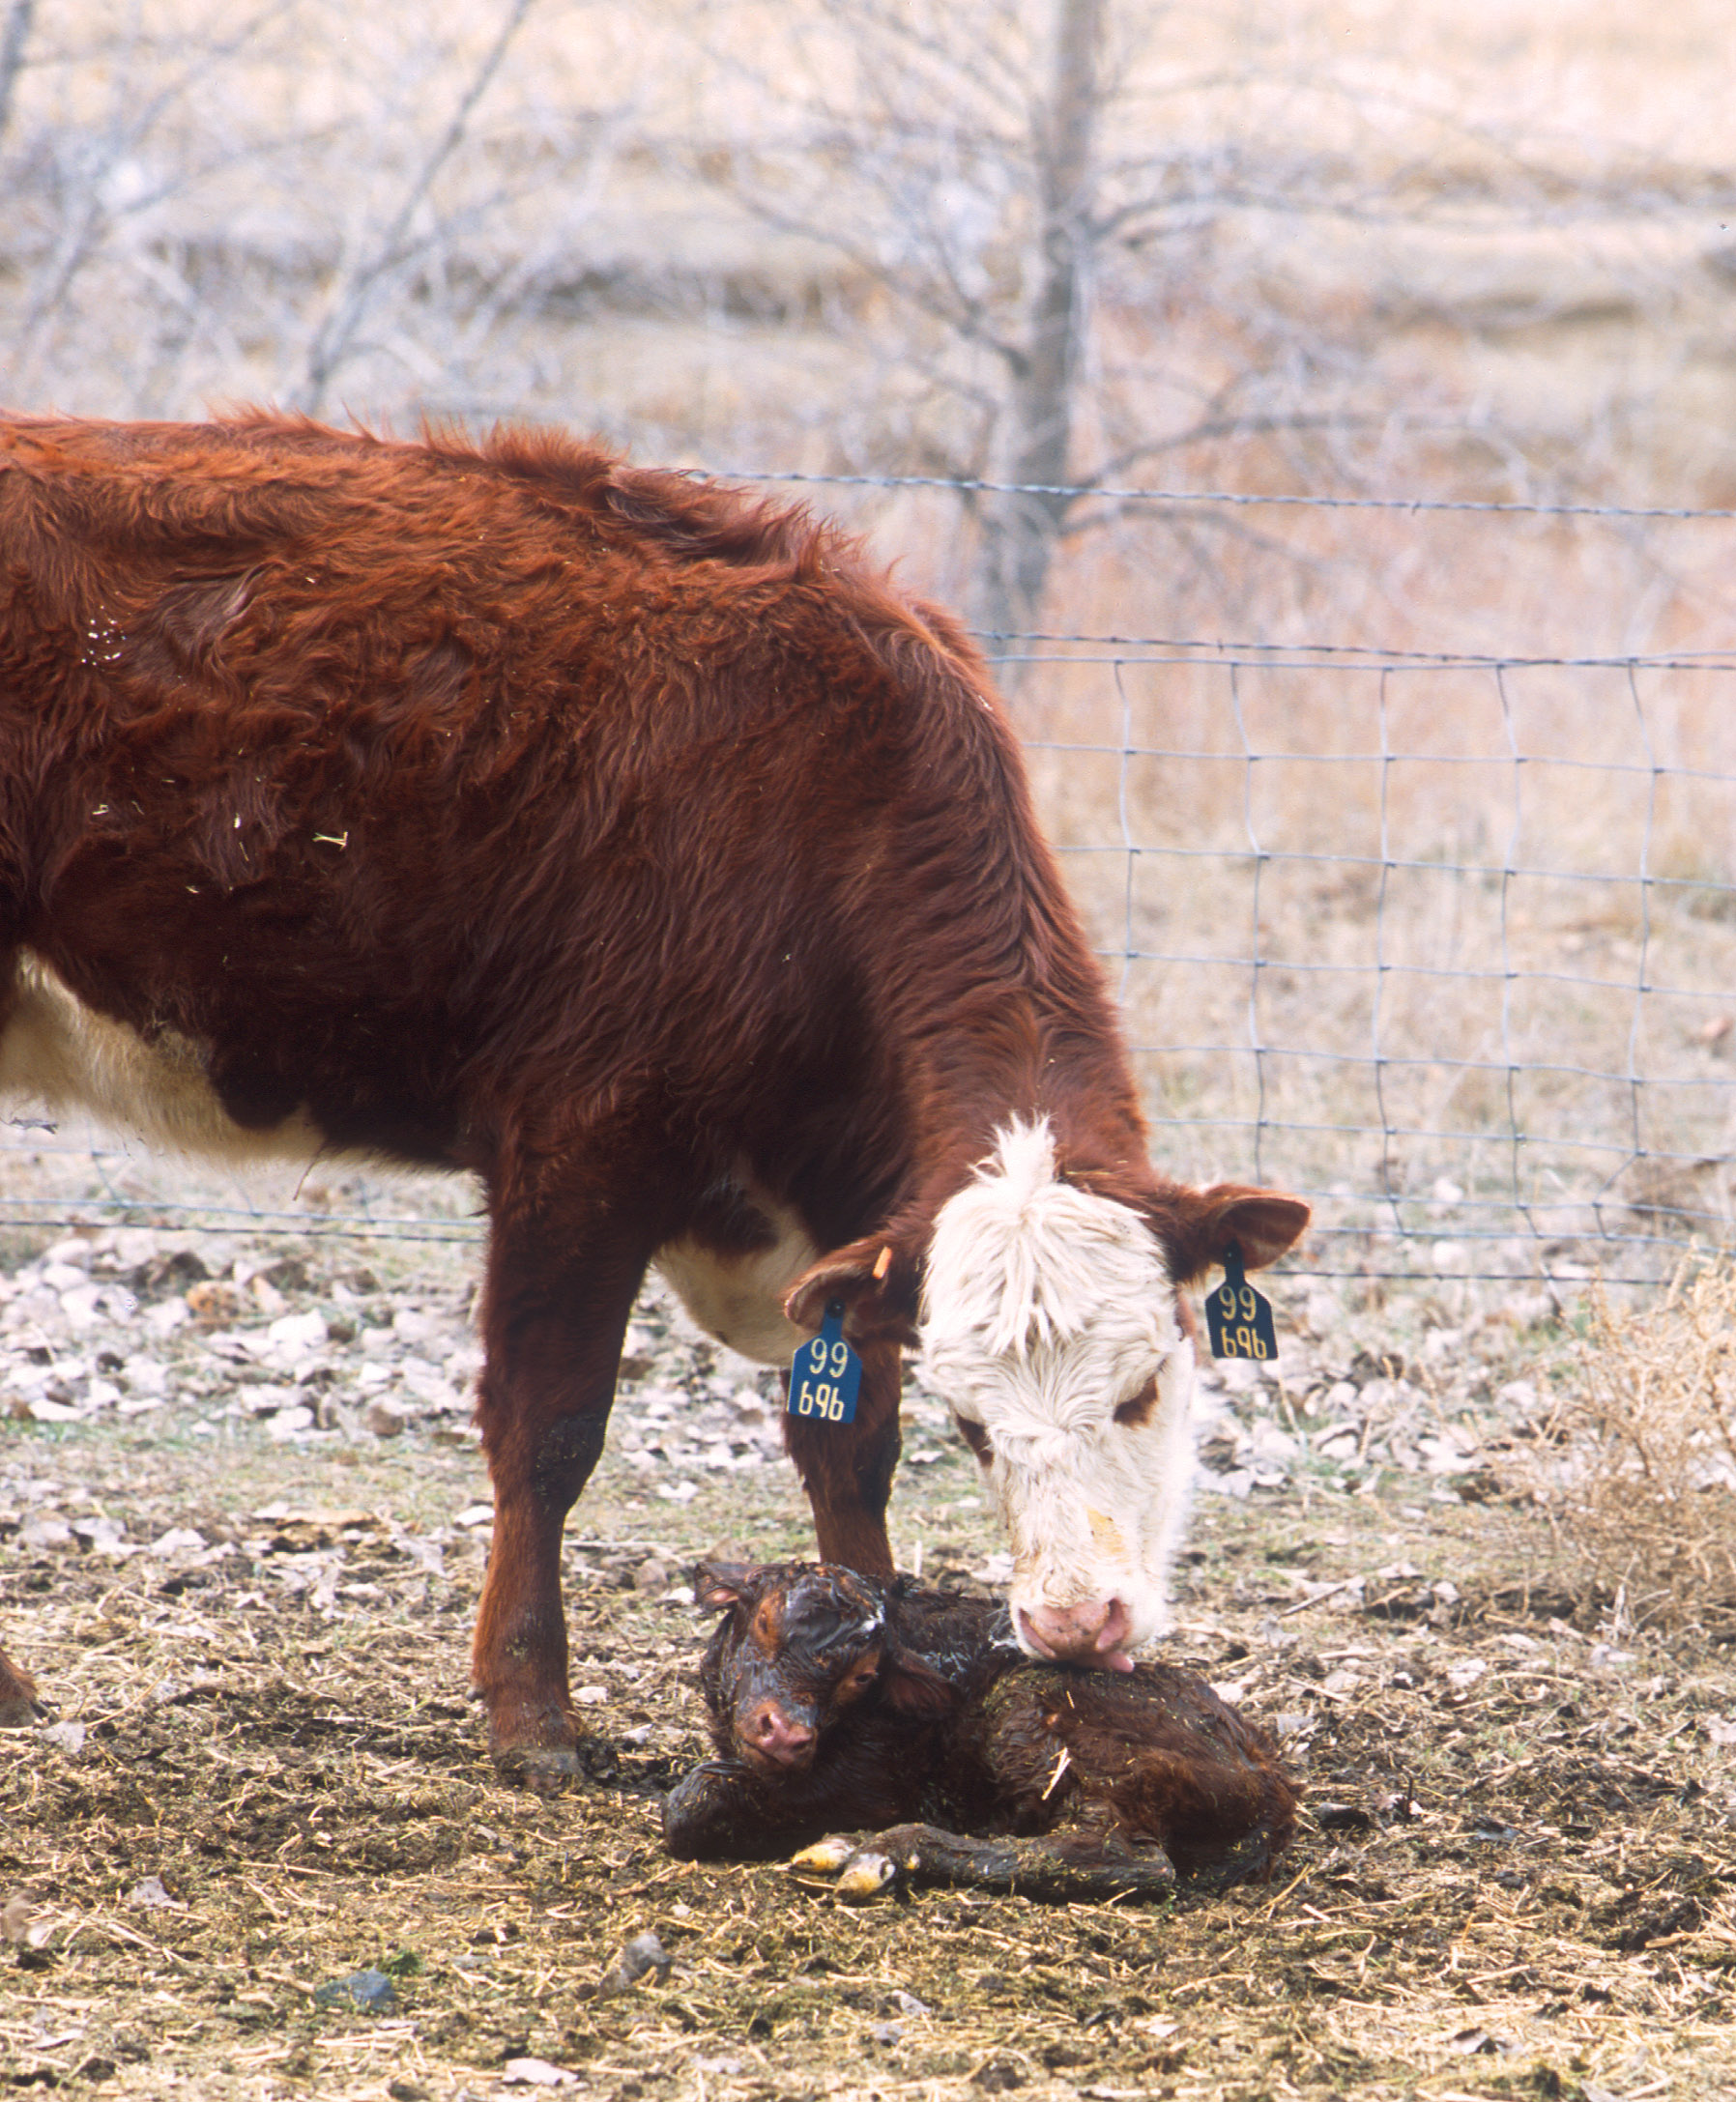 A newborn calf with its mother in a snowy field